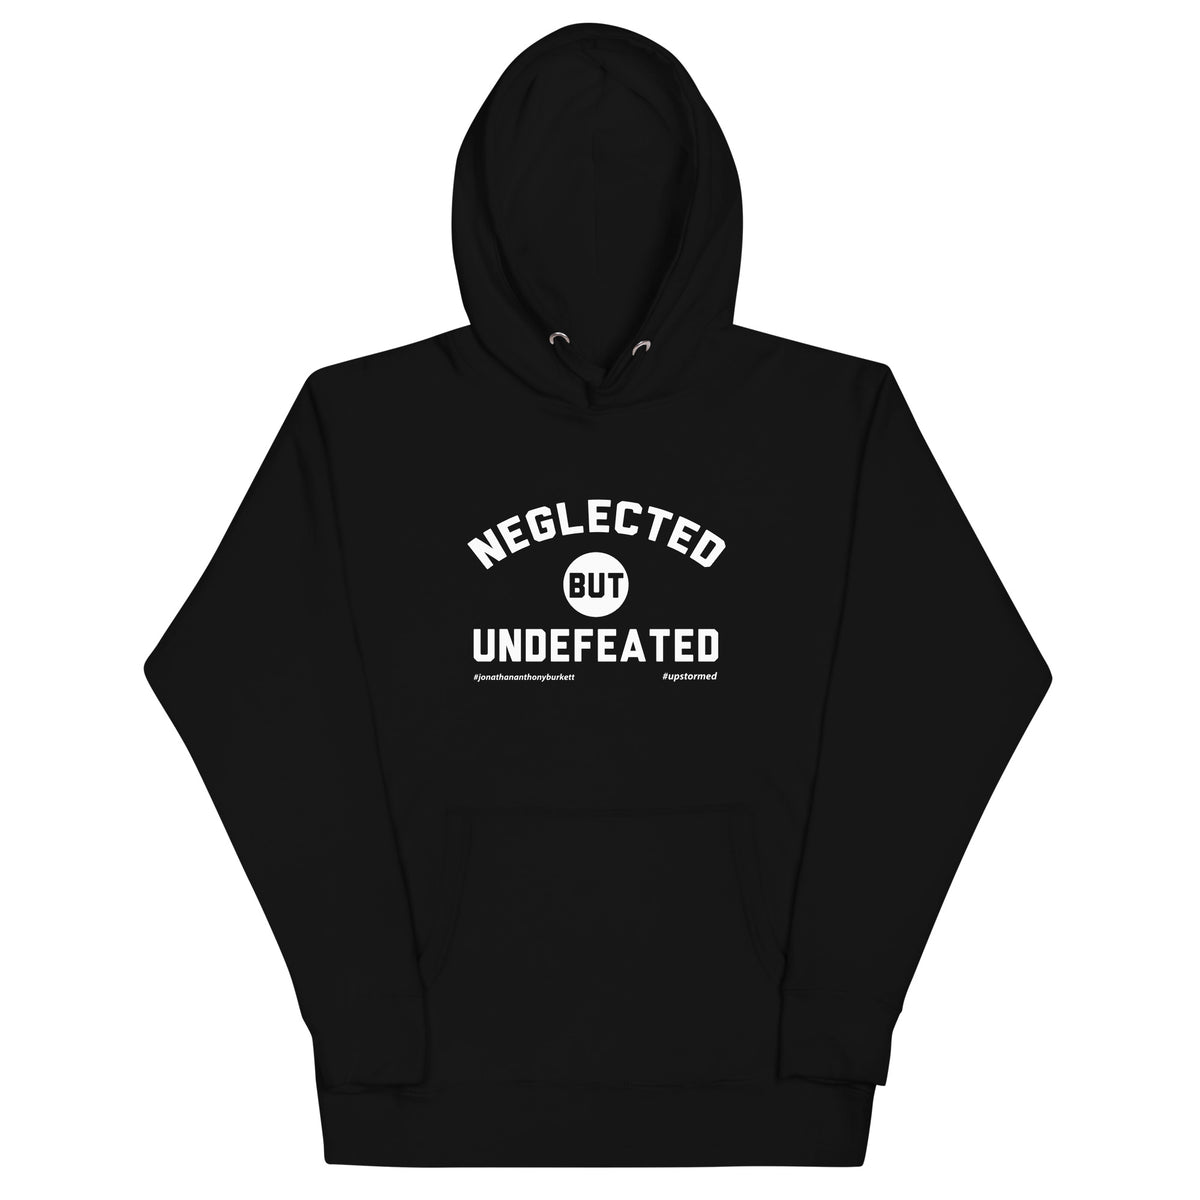 Neglected But Undefeated Upstormed Hoodie